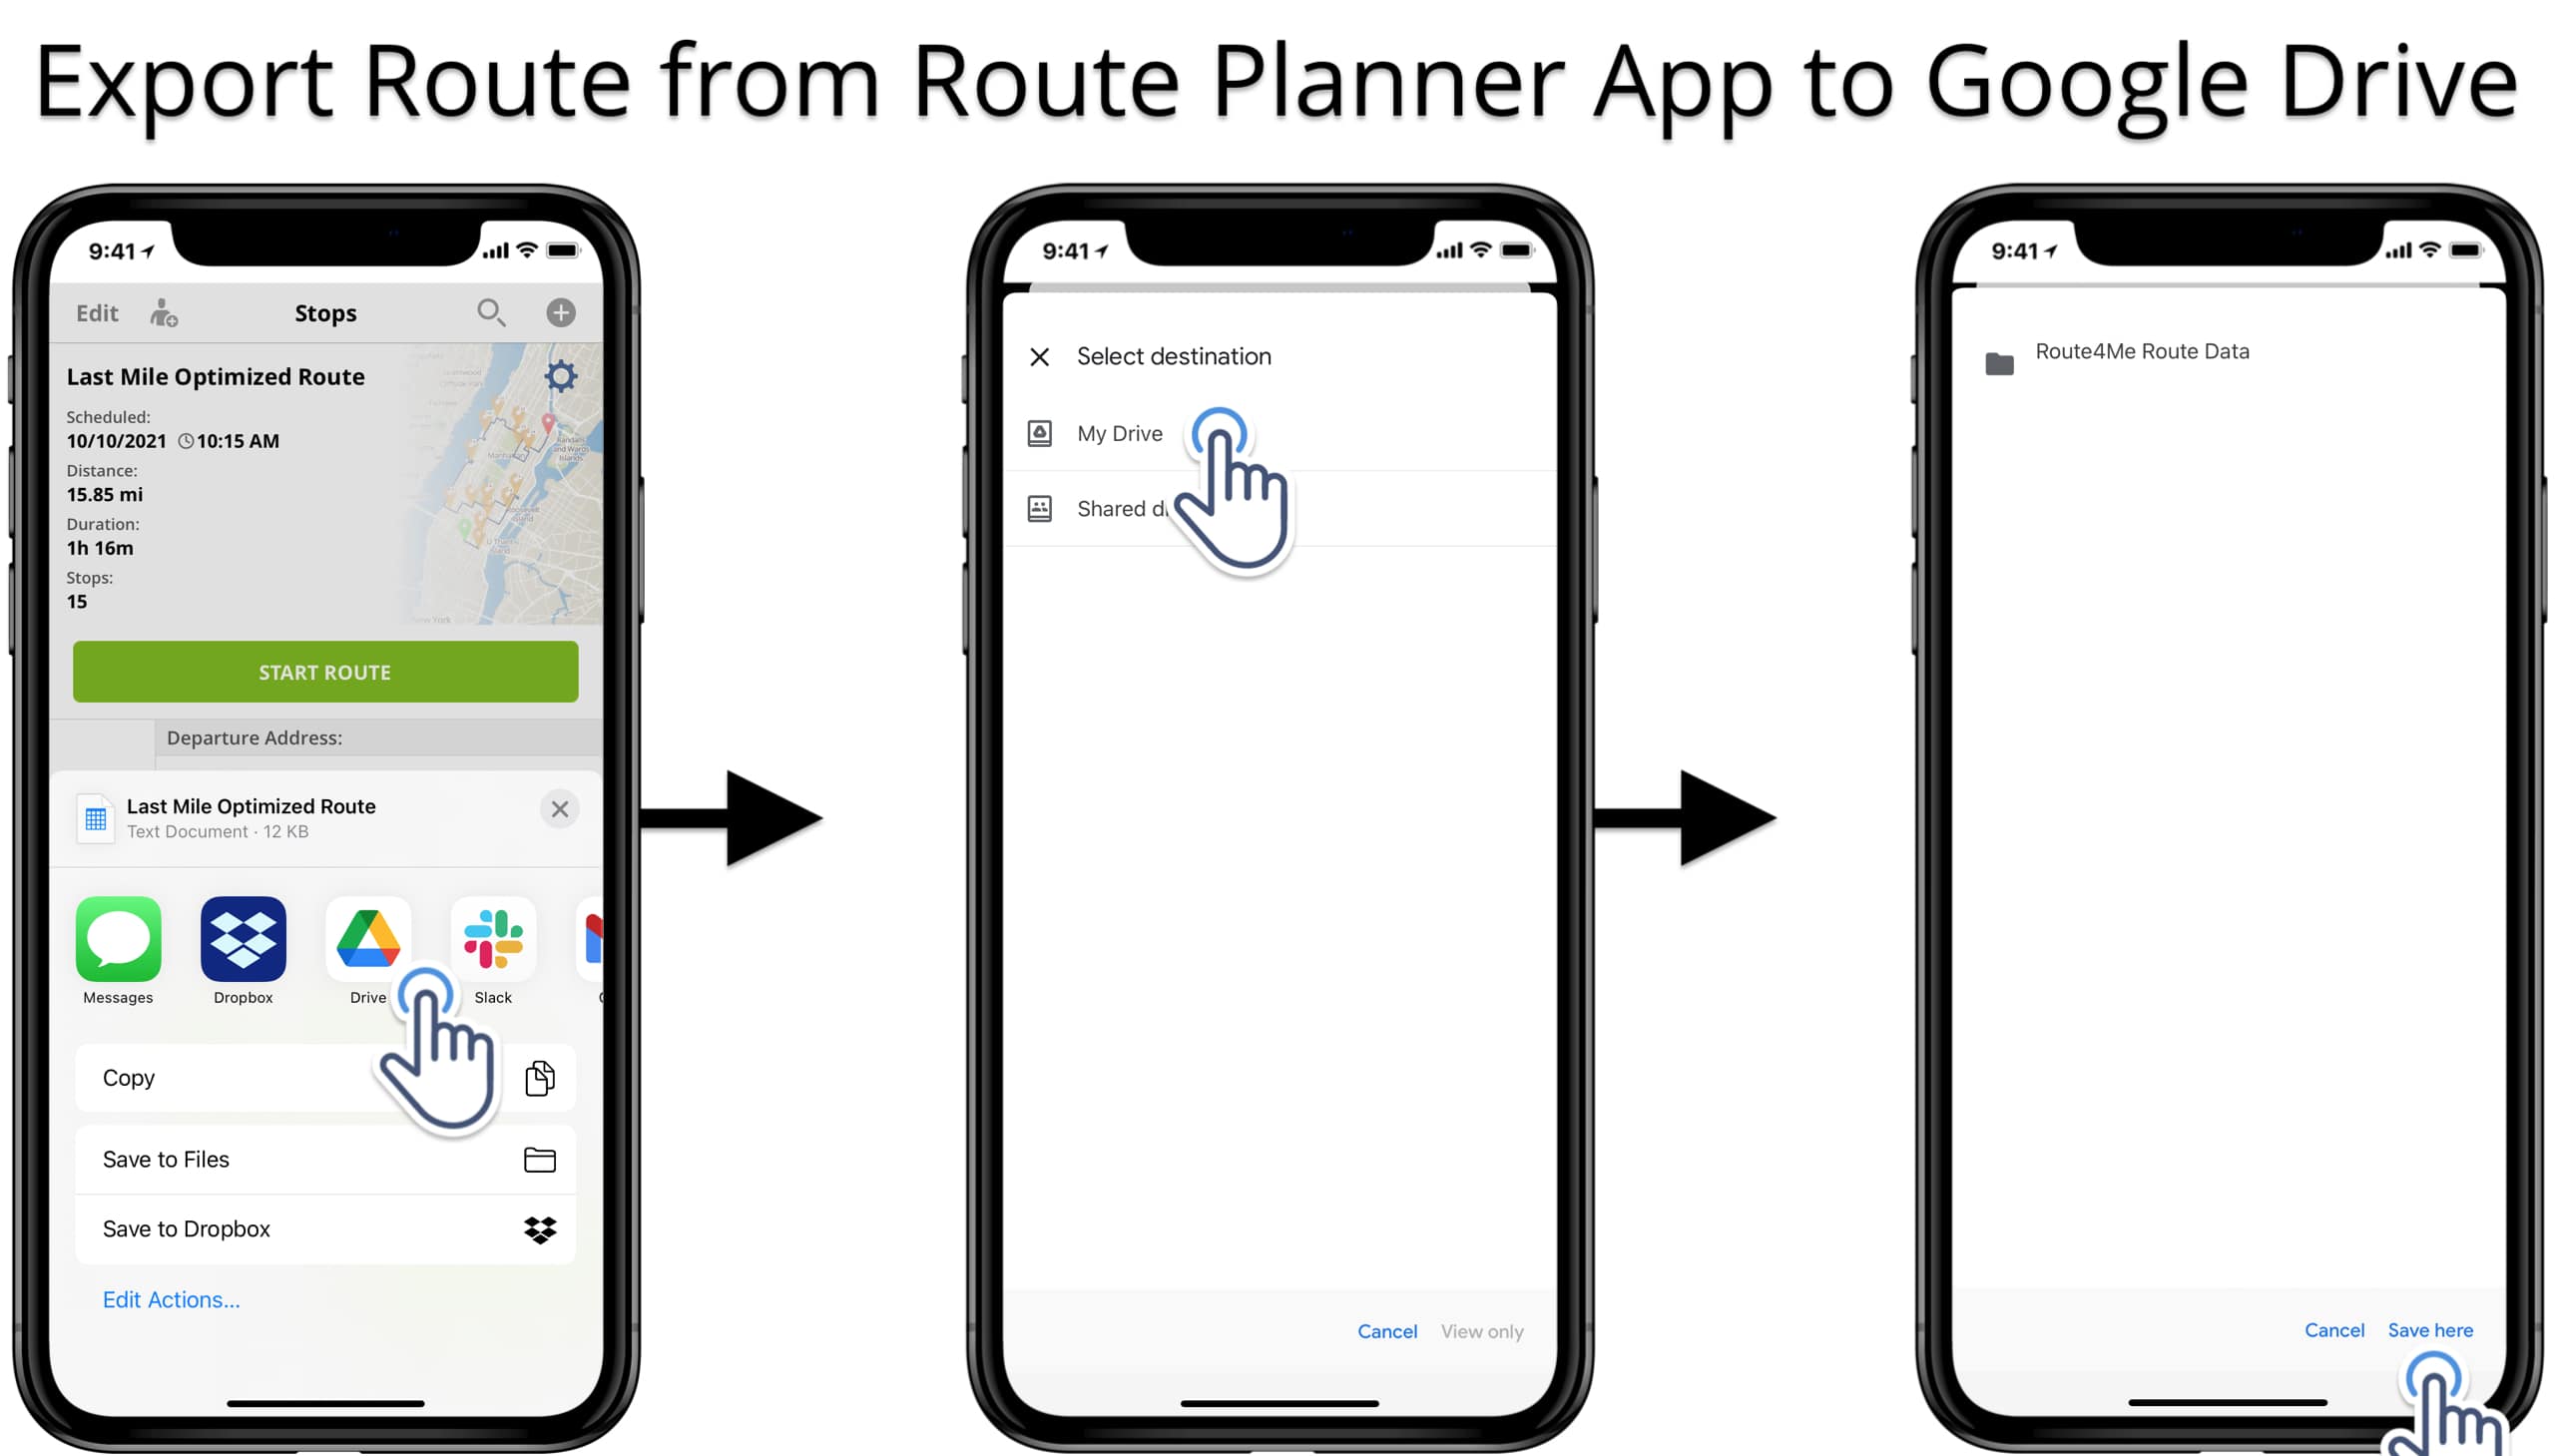 Export route planner routes to Google Drive on iPhone or iPad.